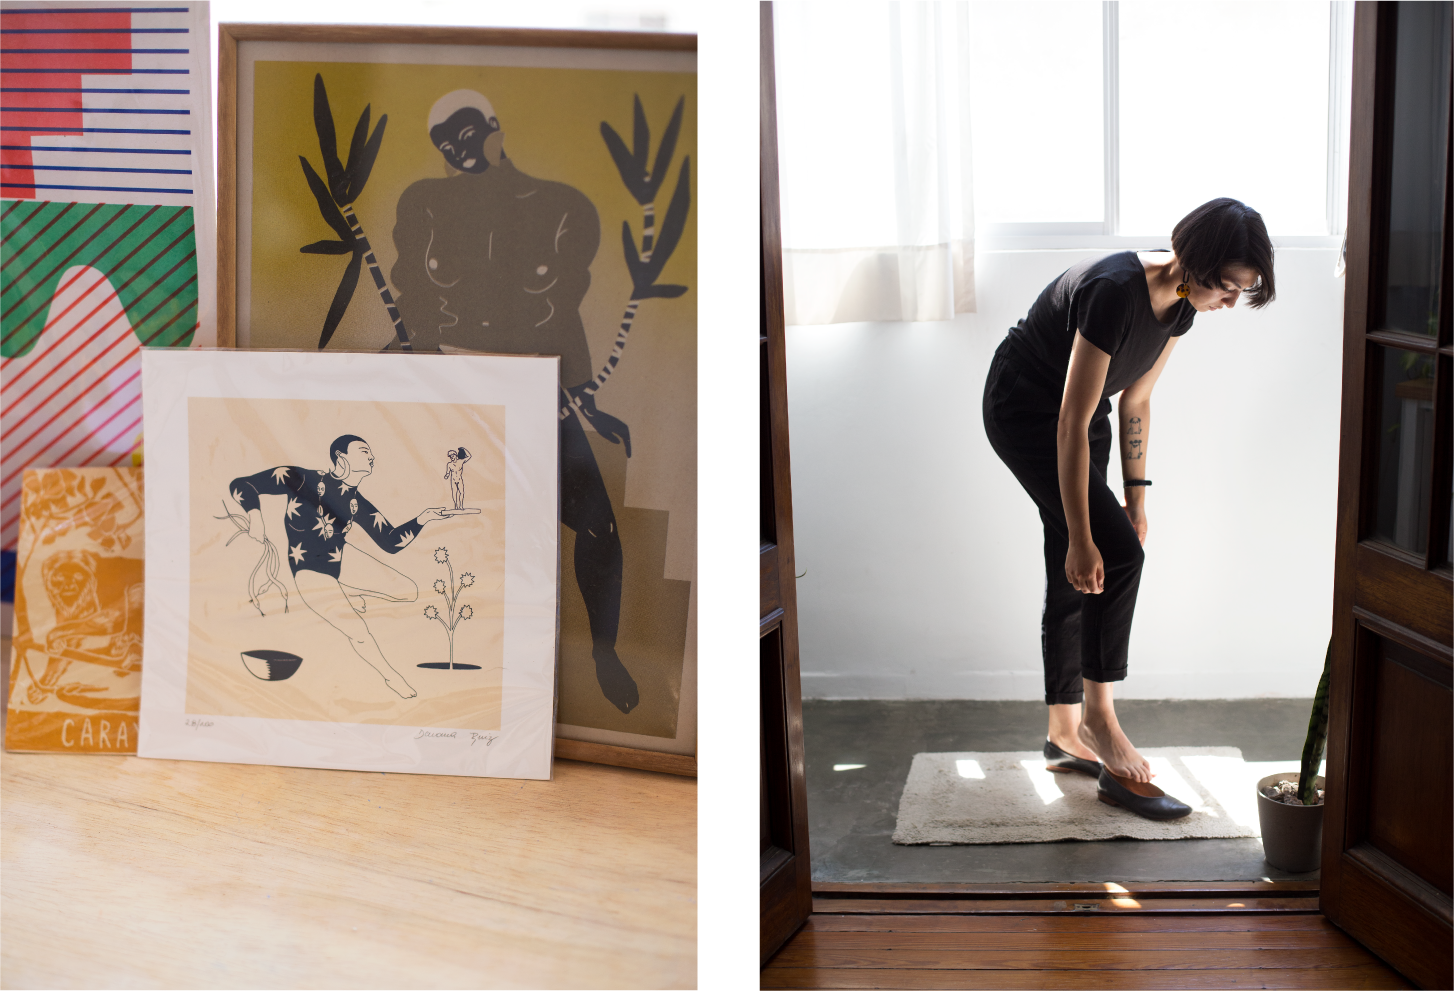 Left: Some prints by Daiana and others artists arranged on a living room credenza. Right: Daiana puts the finishing touches on her outfit with the Glove Flat in Black Glaze.